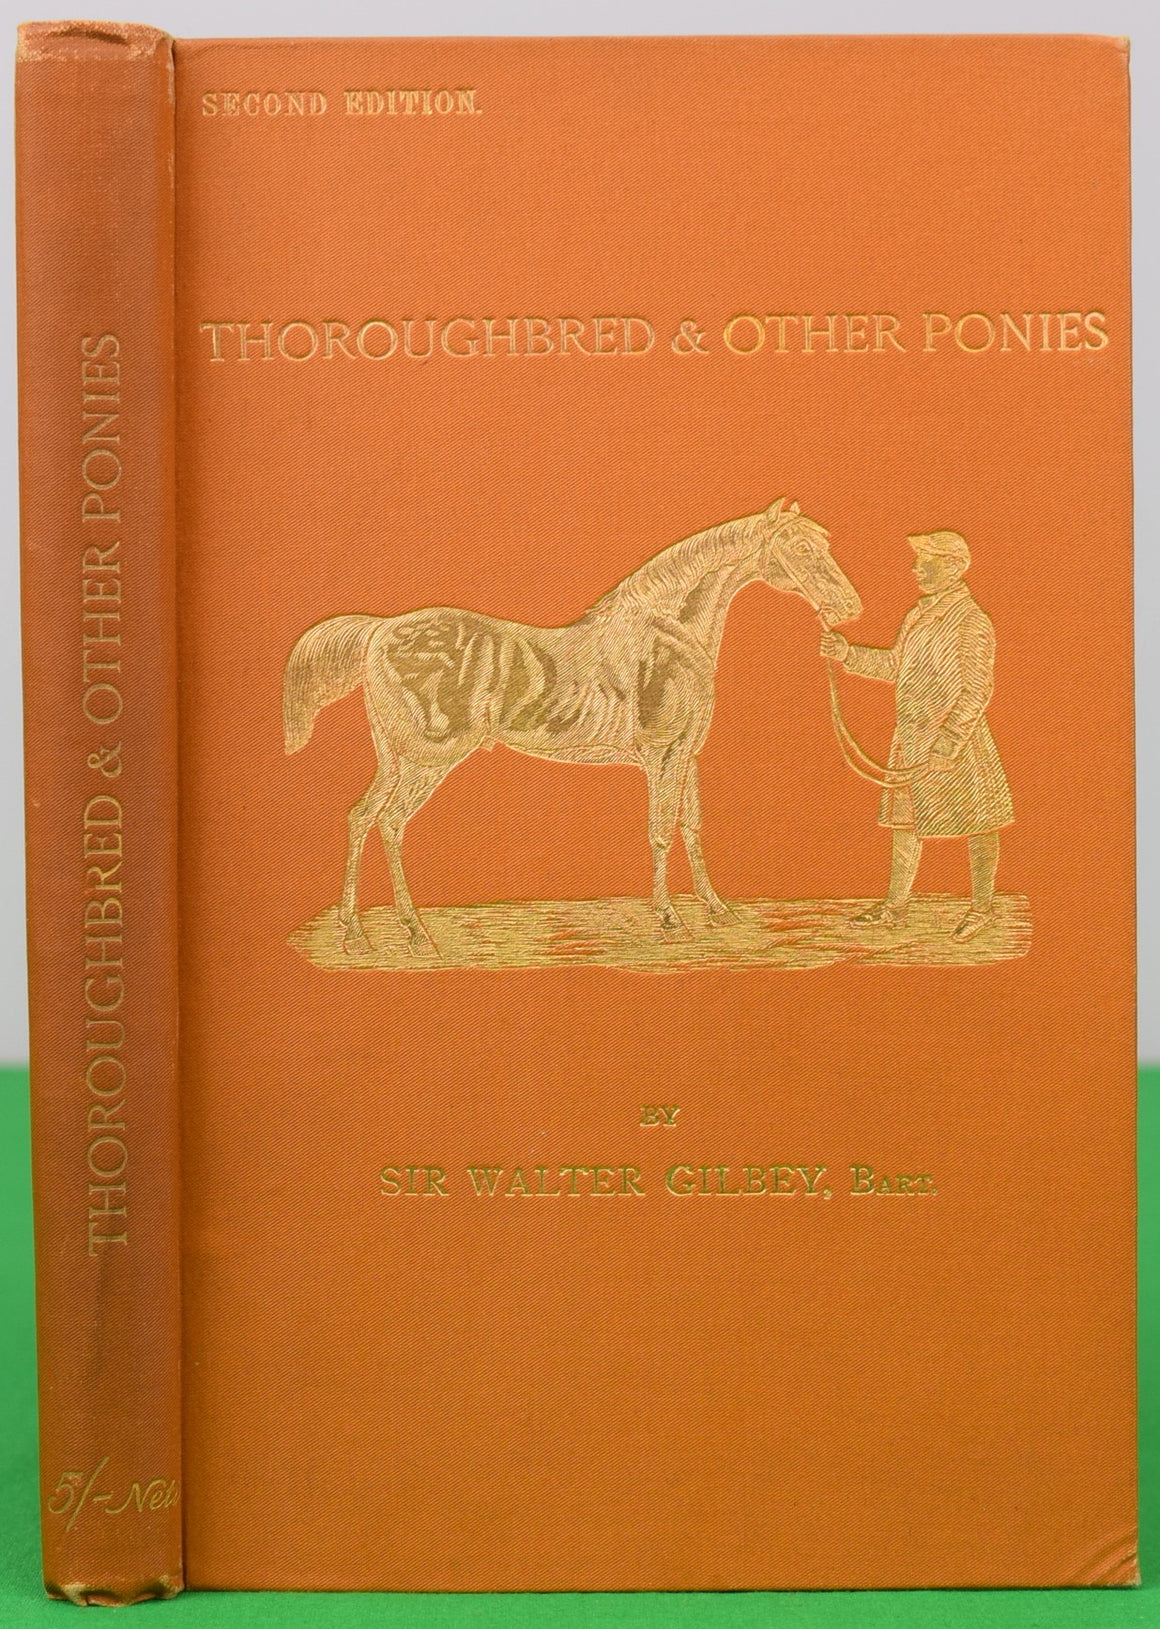 "Thoroughbred & Other Ponies" 1903 GILBEY, Sir Walter Bart.